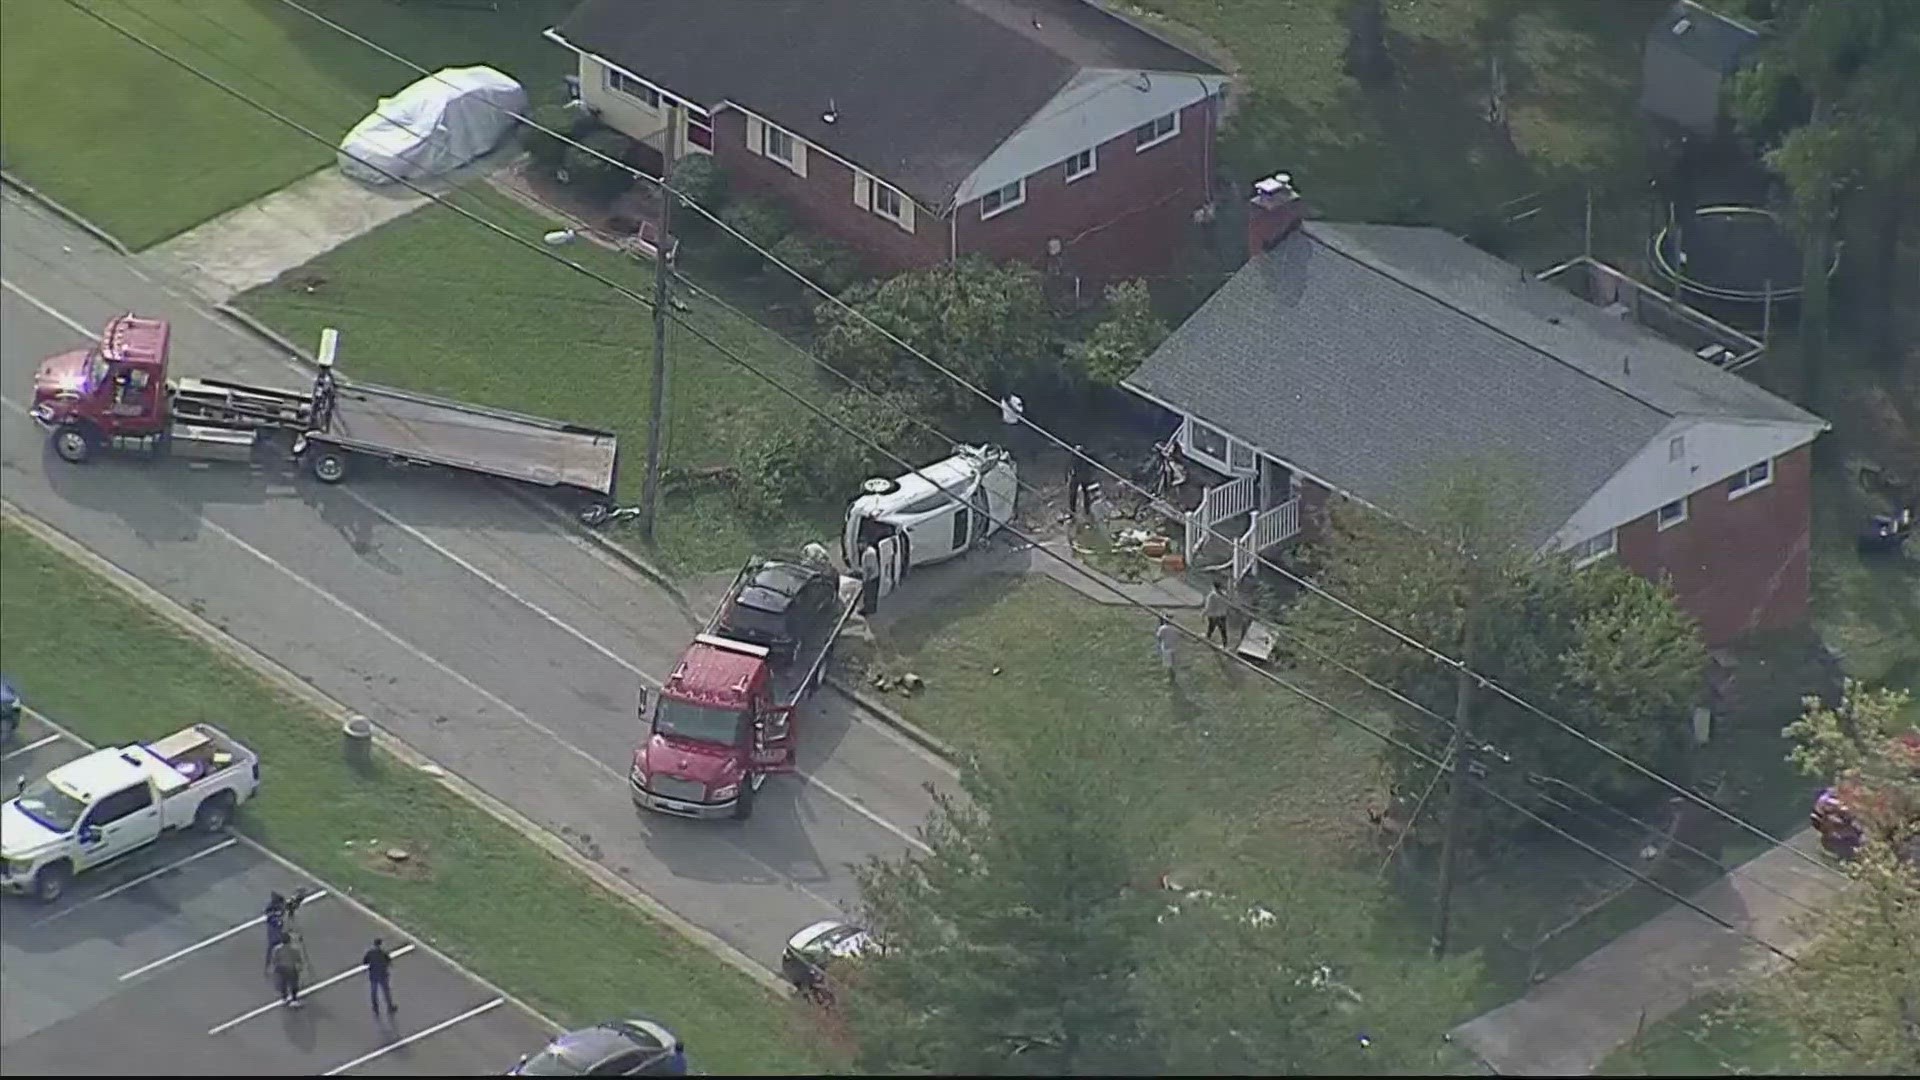 Seven people have been displaced from their home after a car struck a house in College Park on Friday morning.